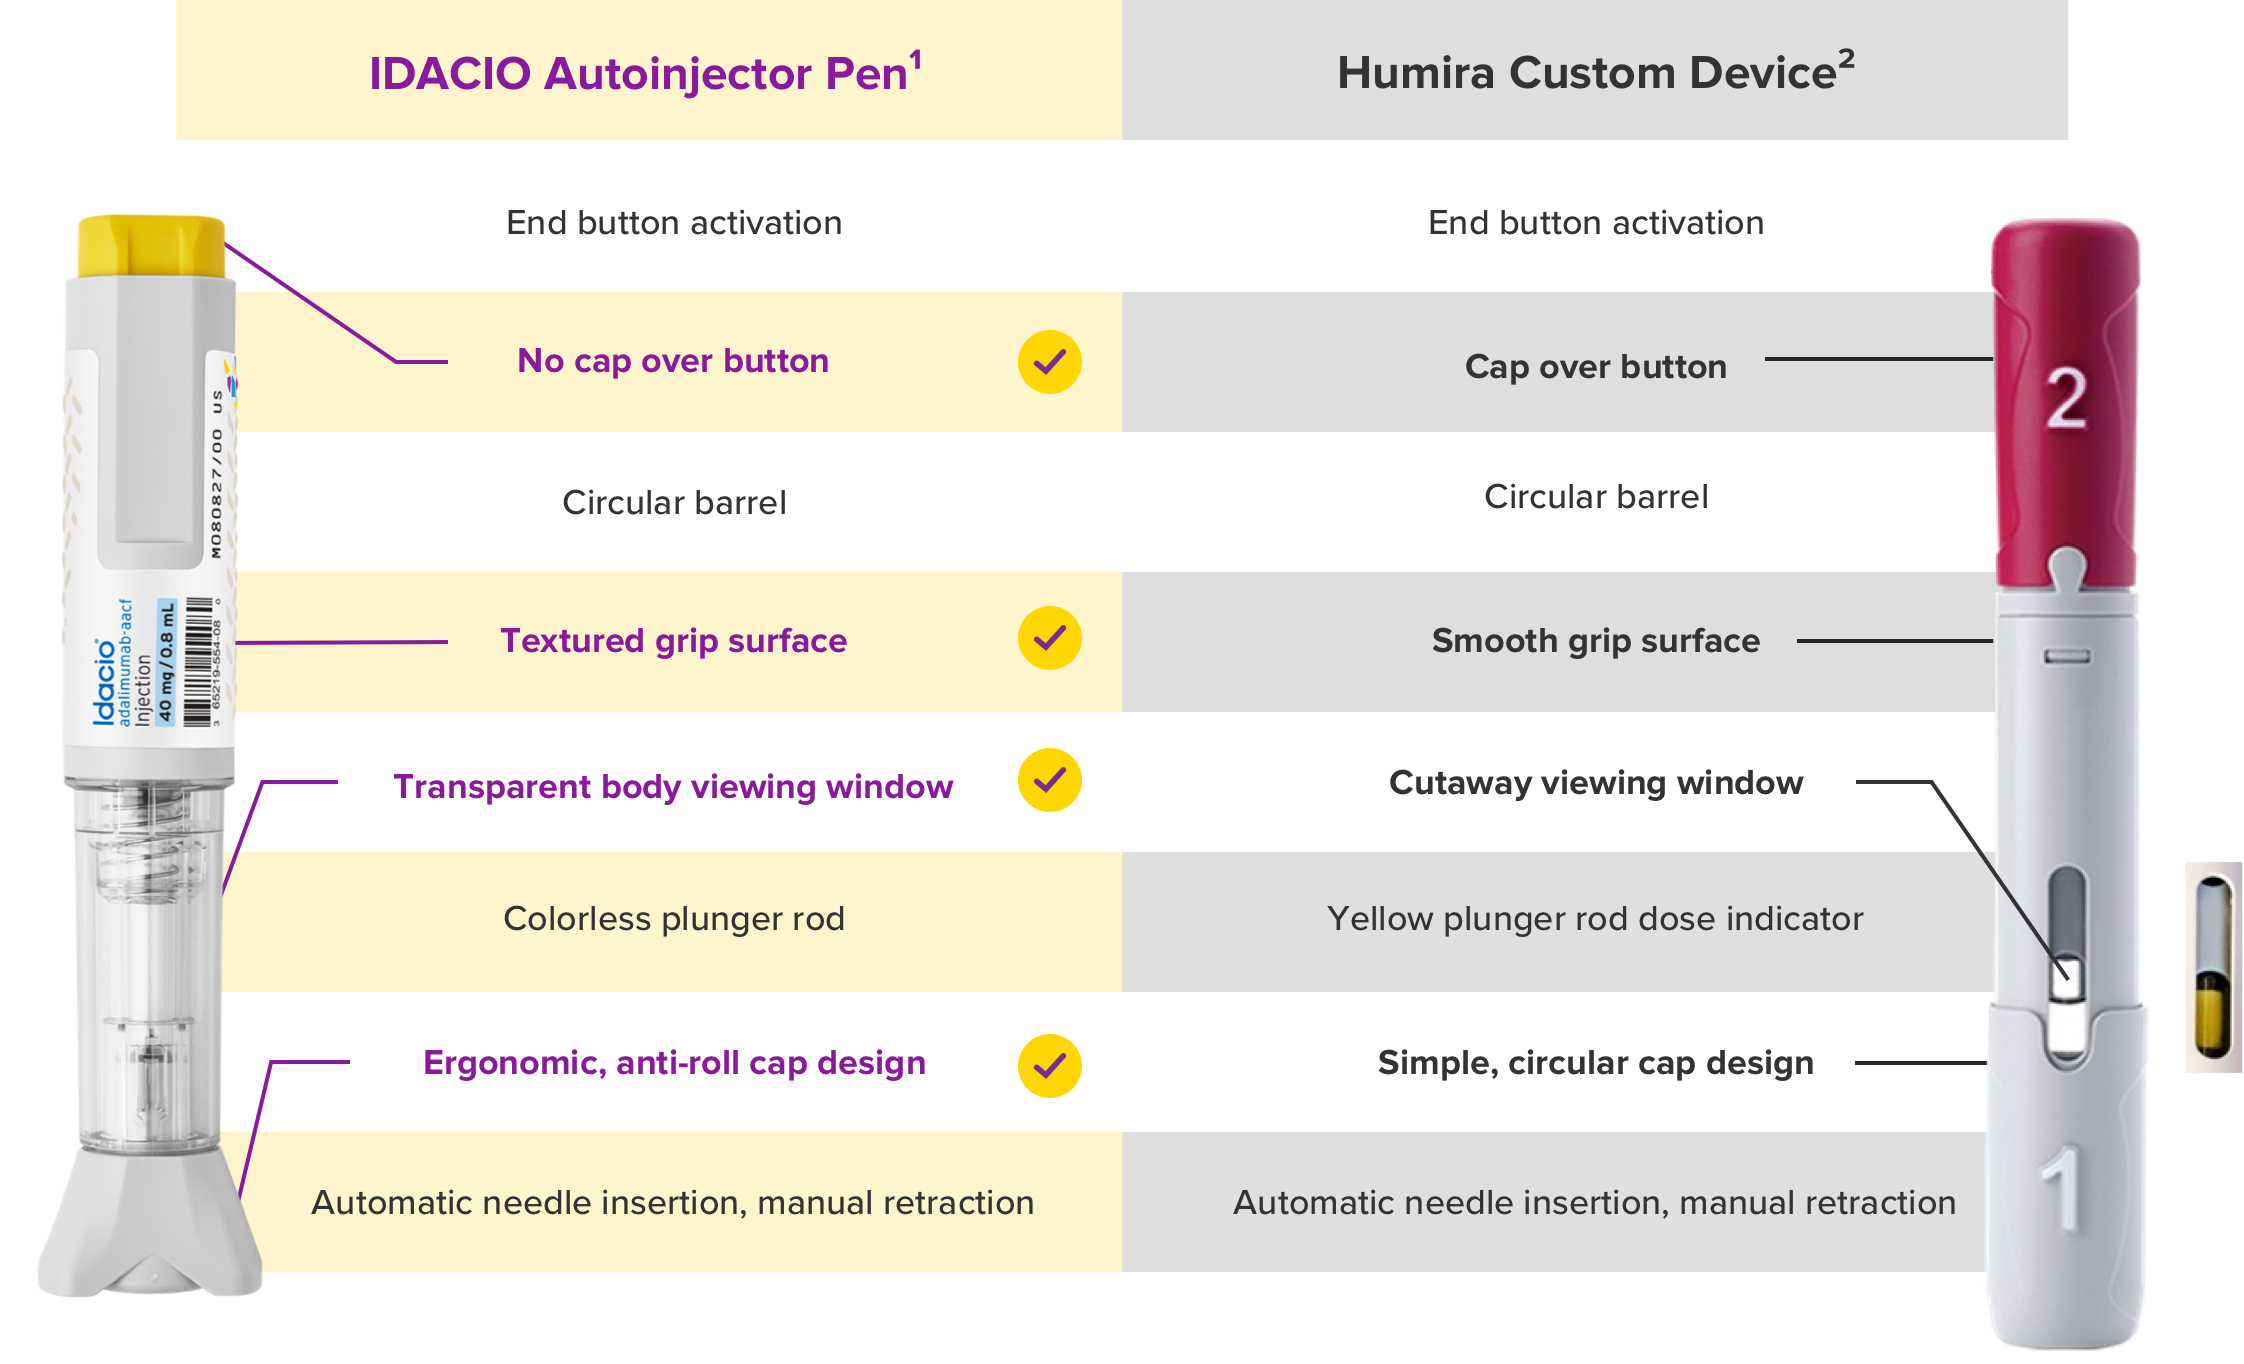 Side-by-side comparison chart of IDACIO and Humira pens